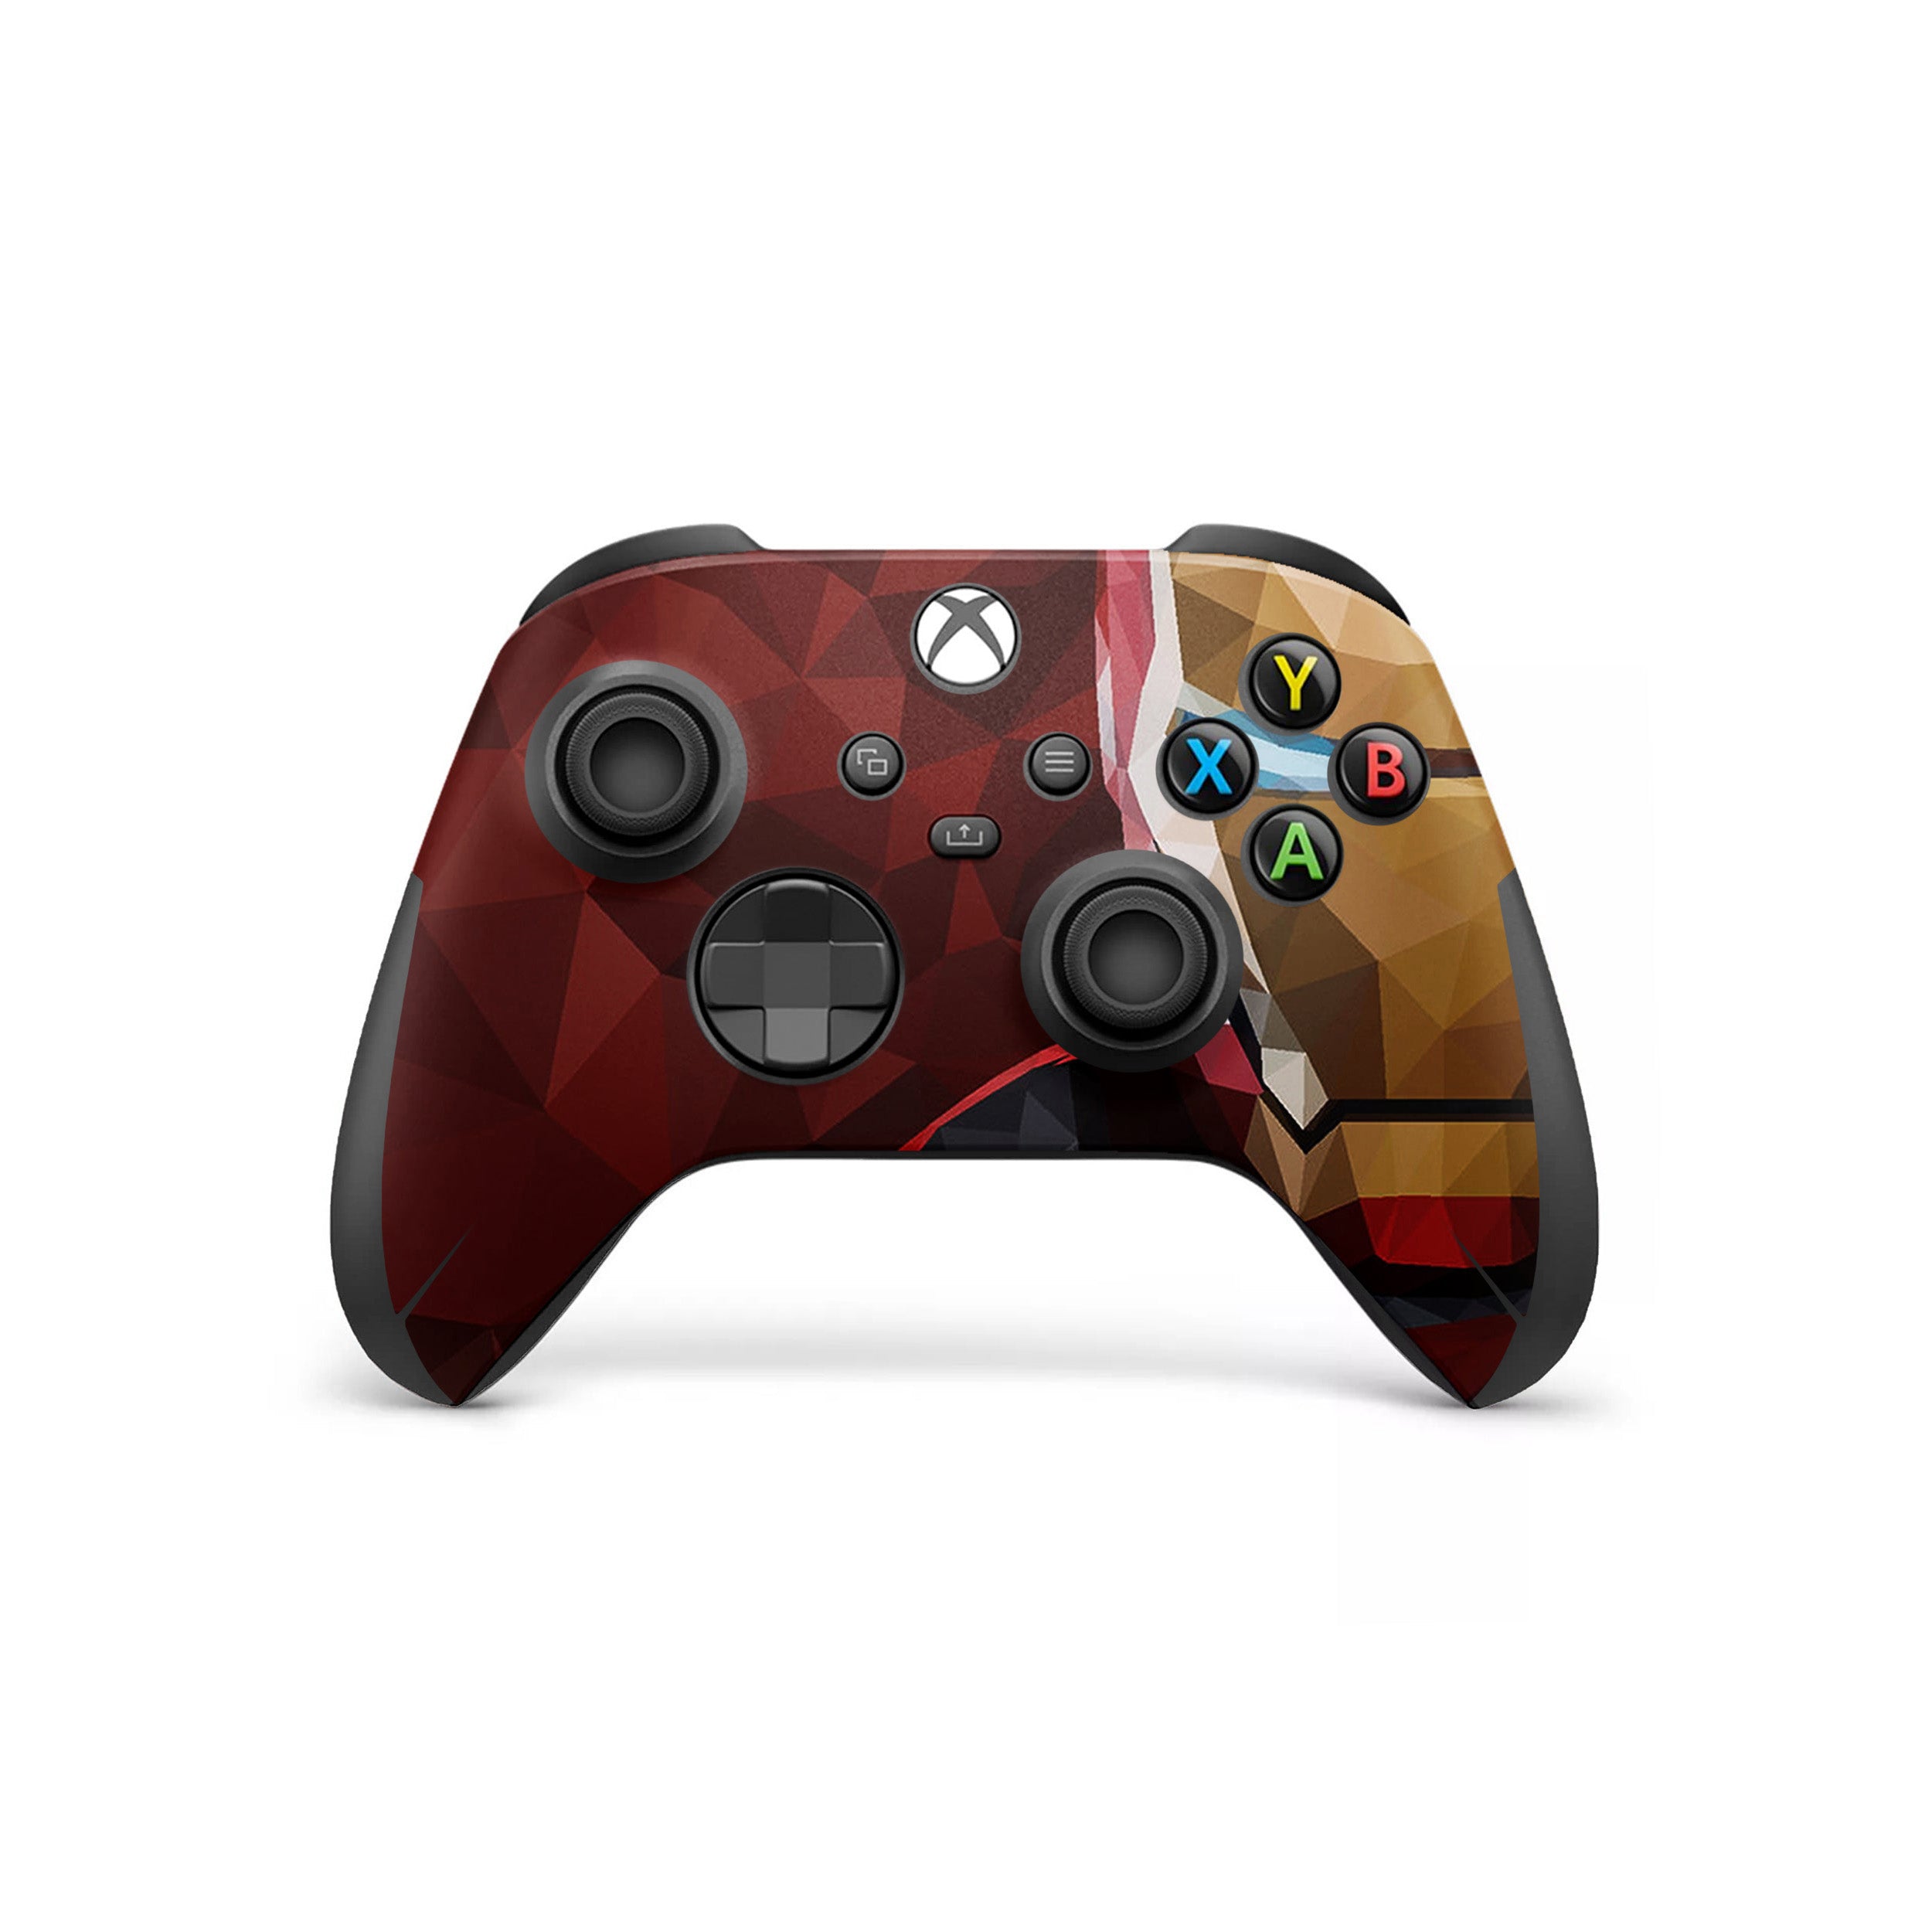 A video game skin featuring a Marvel Iron Man design for the Xbox Wireless Controller.